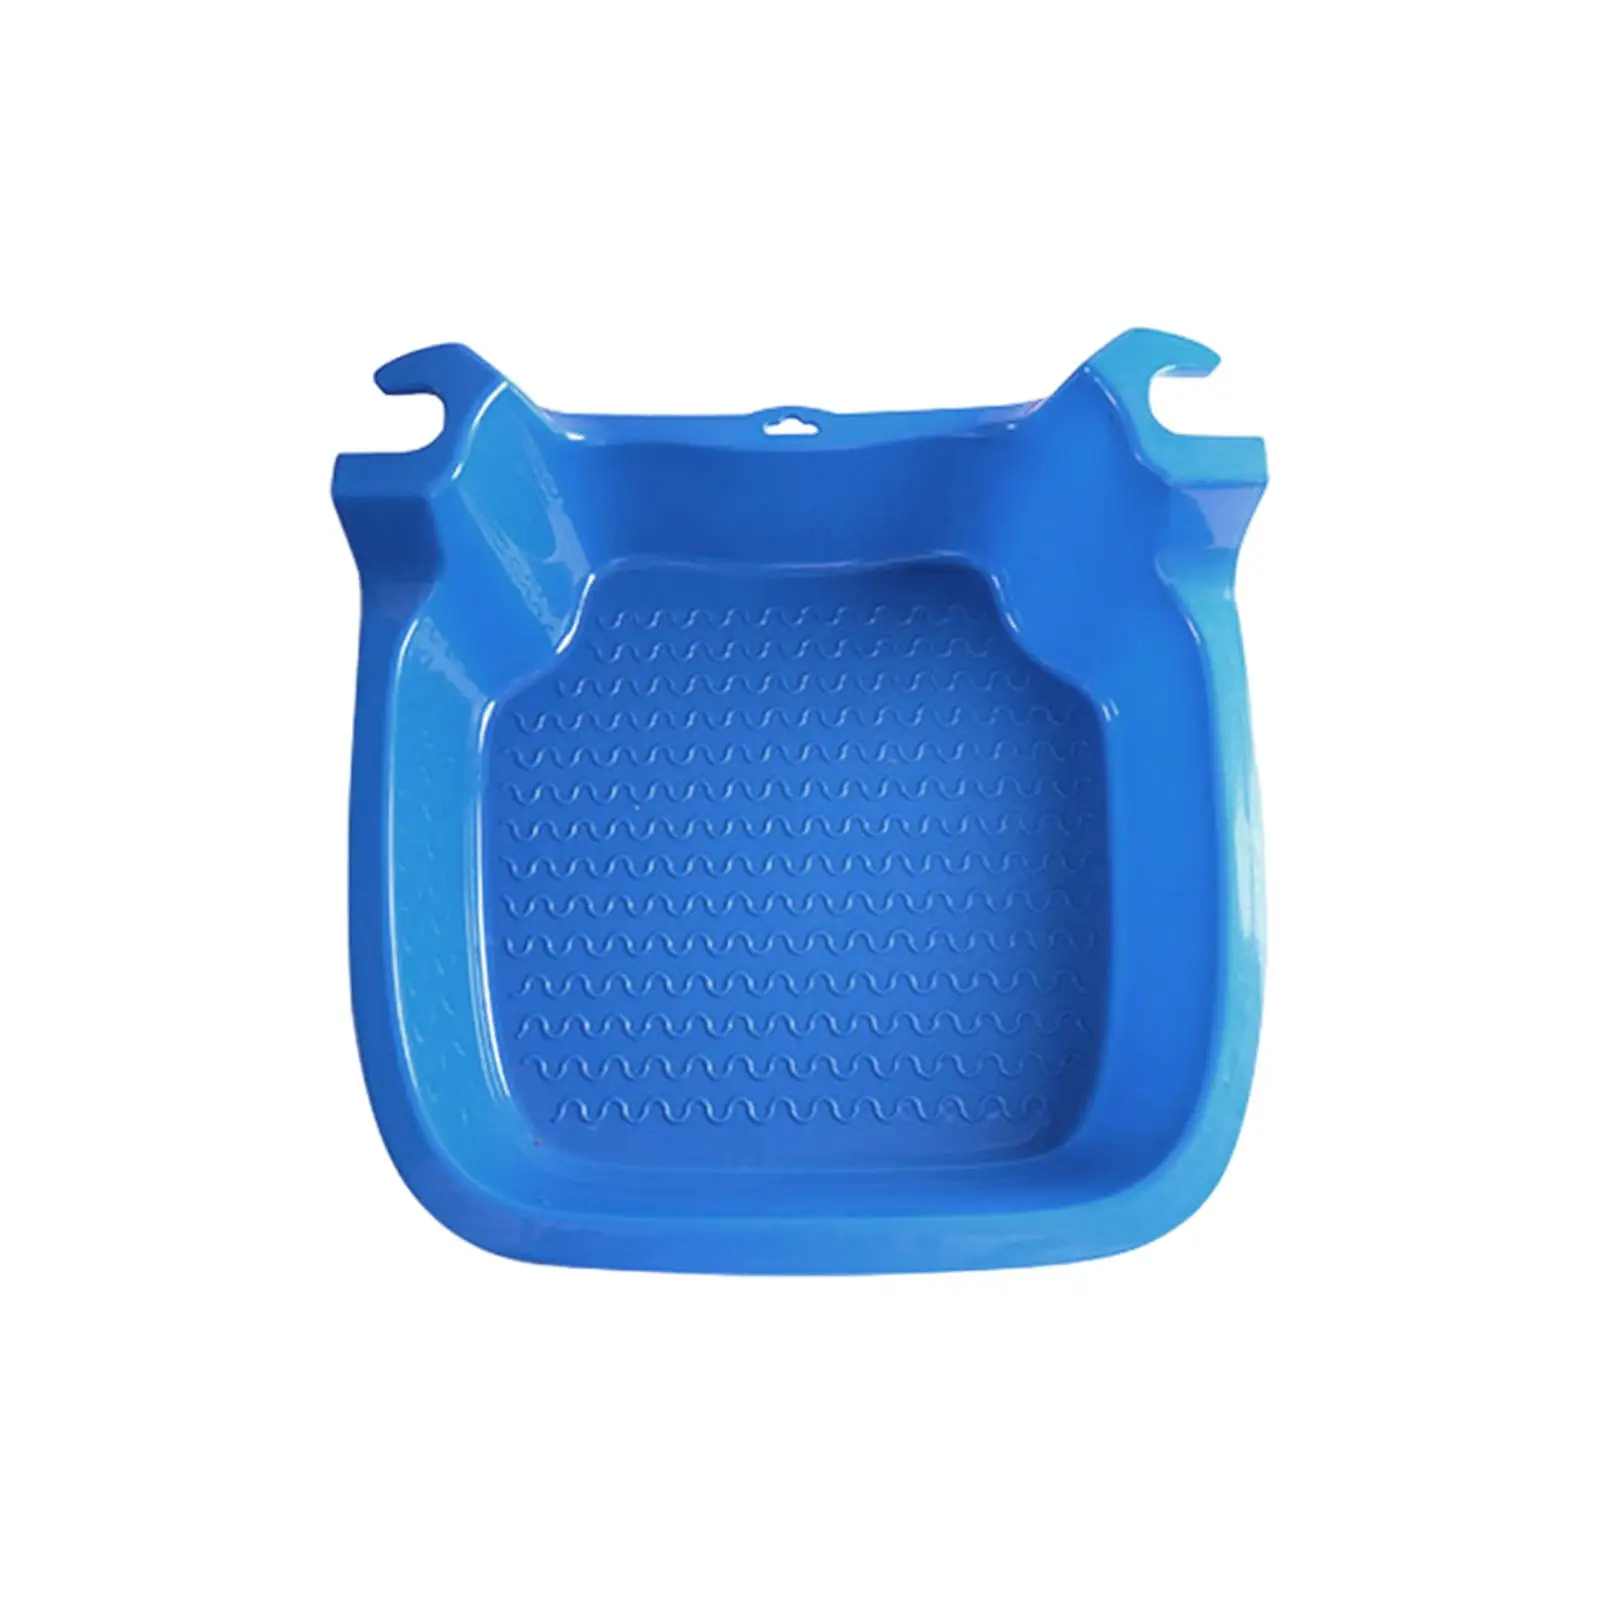 Pool Foot Bath Durable Large Sturdy Water Container Pool Foot Bath Basin for Swimming Pool Clean Feet SPA Massager Tub Adult